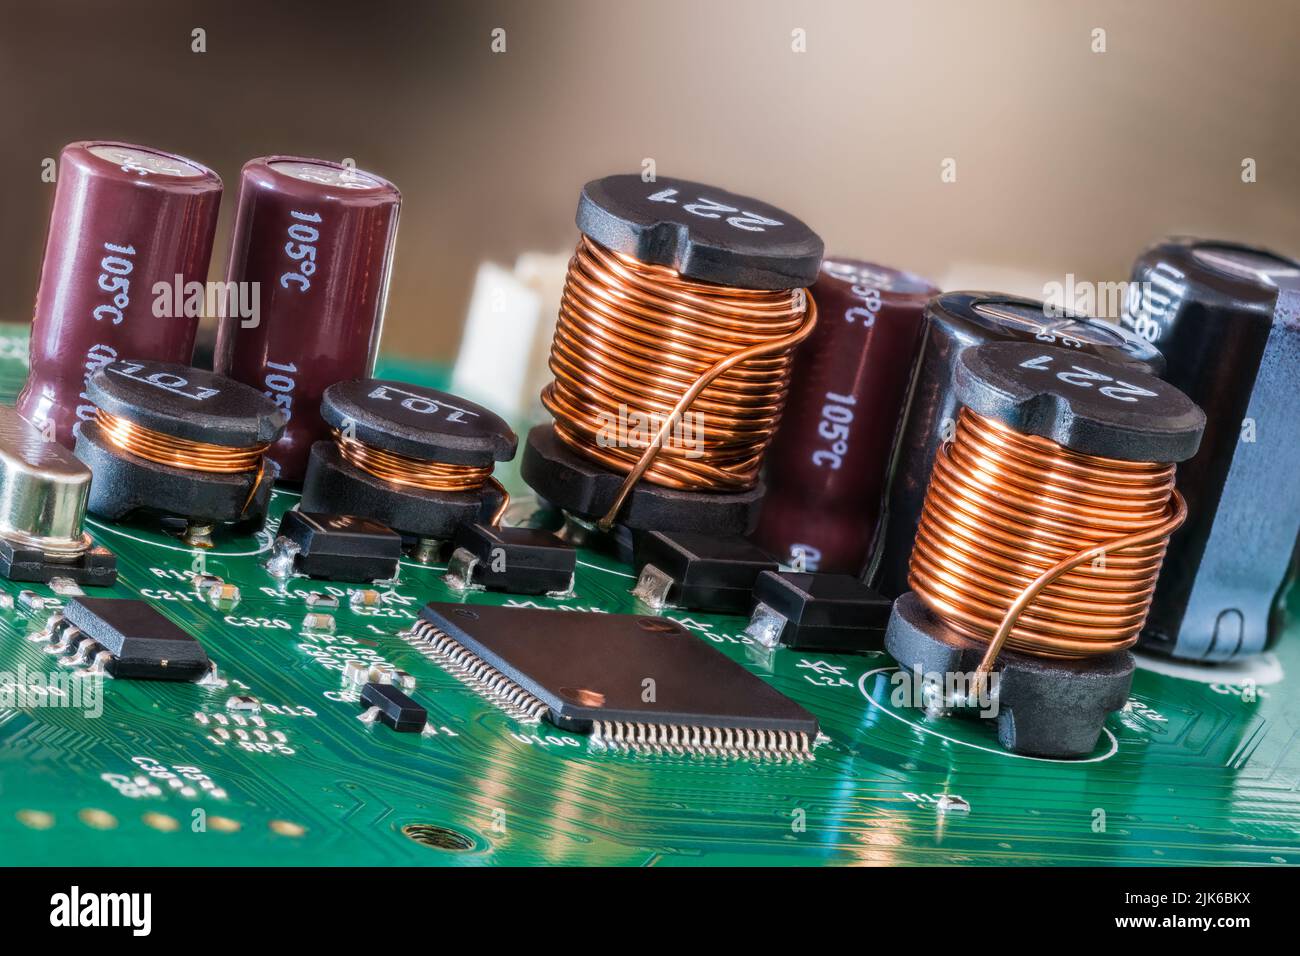 Closeup of electromagnetic coils and electrolytic capacitors or chips on green PCB. Various electrical components on printed circuit board. Inductors. Stock Photo